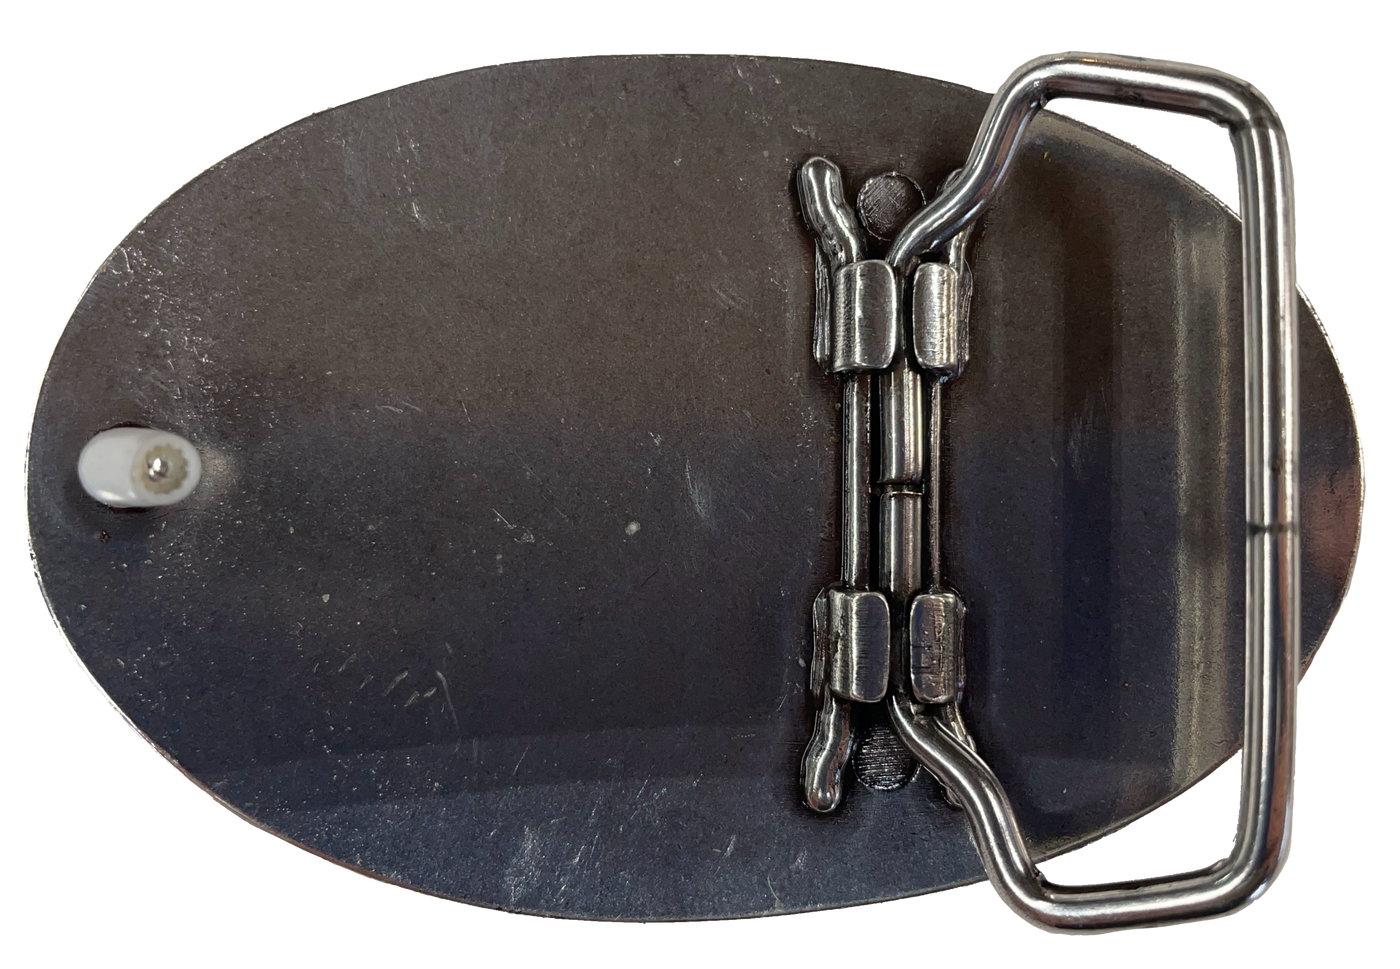 Oval shaped antique silver belt buckle with western style tooling, size approx. 2 3/8" wide by 2" tall. Back of buckle is pictured. Available online and at our shop just outside Nashville in Smyrna, TN.